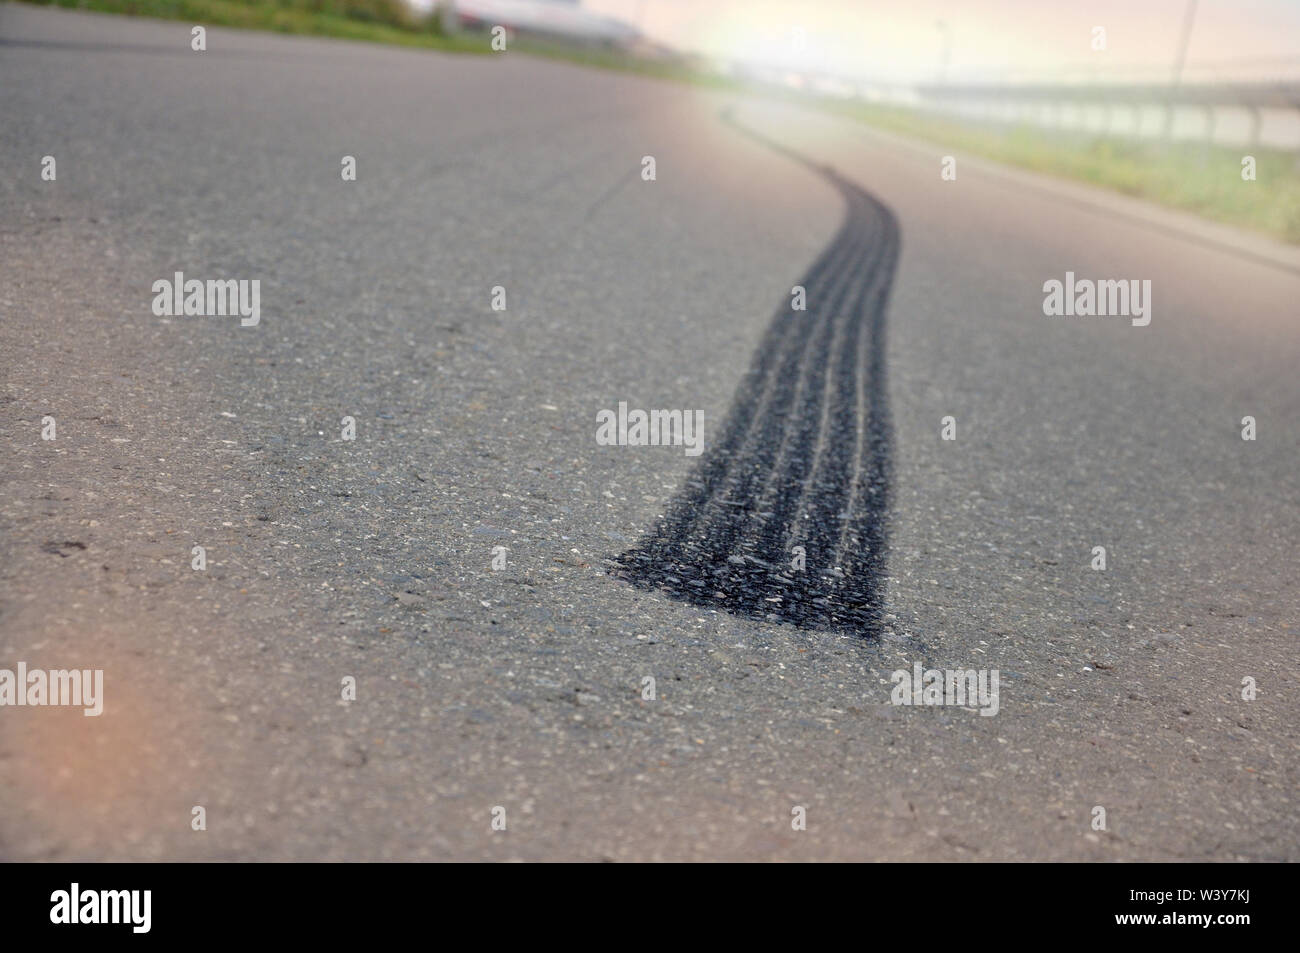 Traces from the tire from emergency braking on asphalt Stock Photo